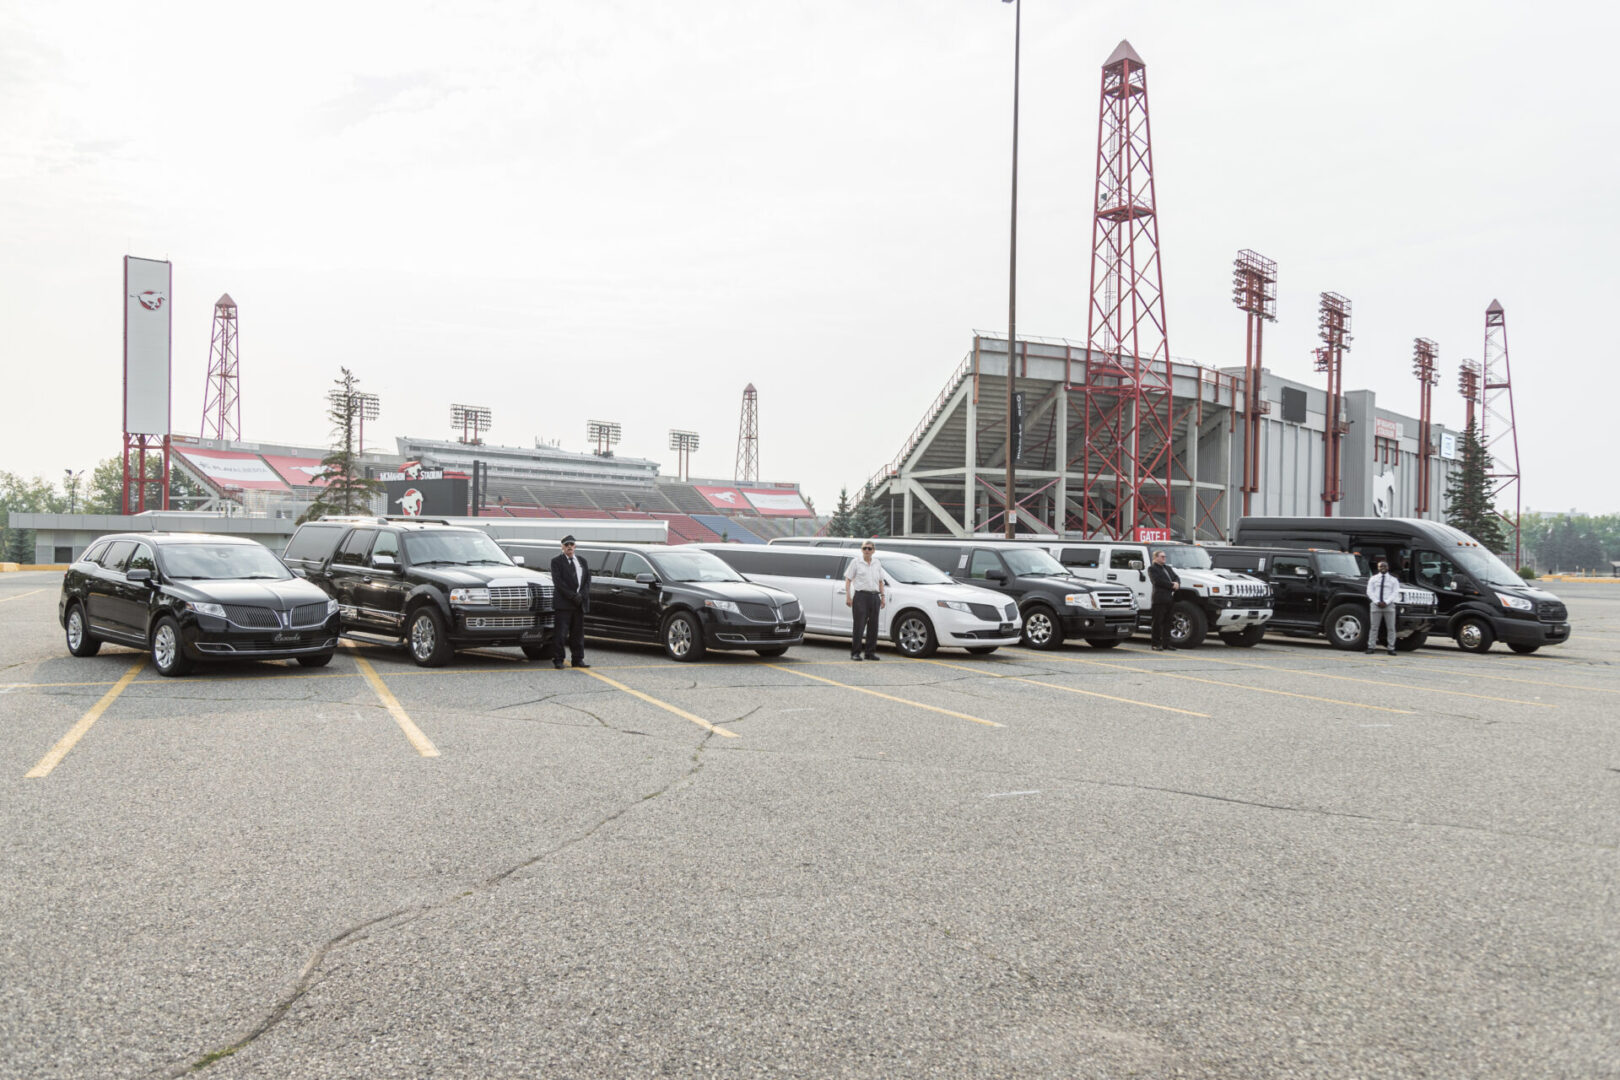 A group of cars parked in a parking lot with a stadium in the background